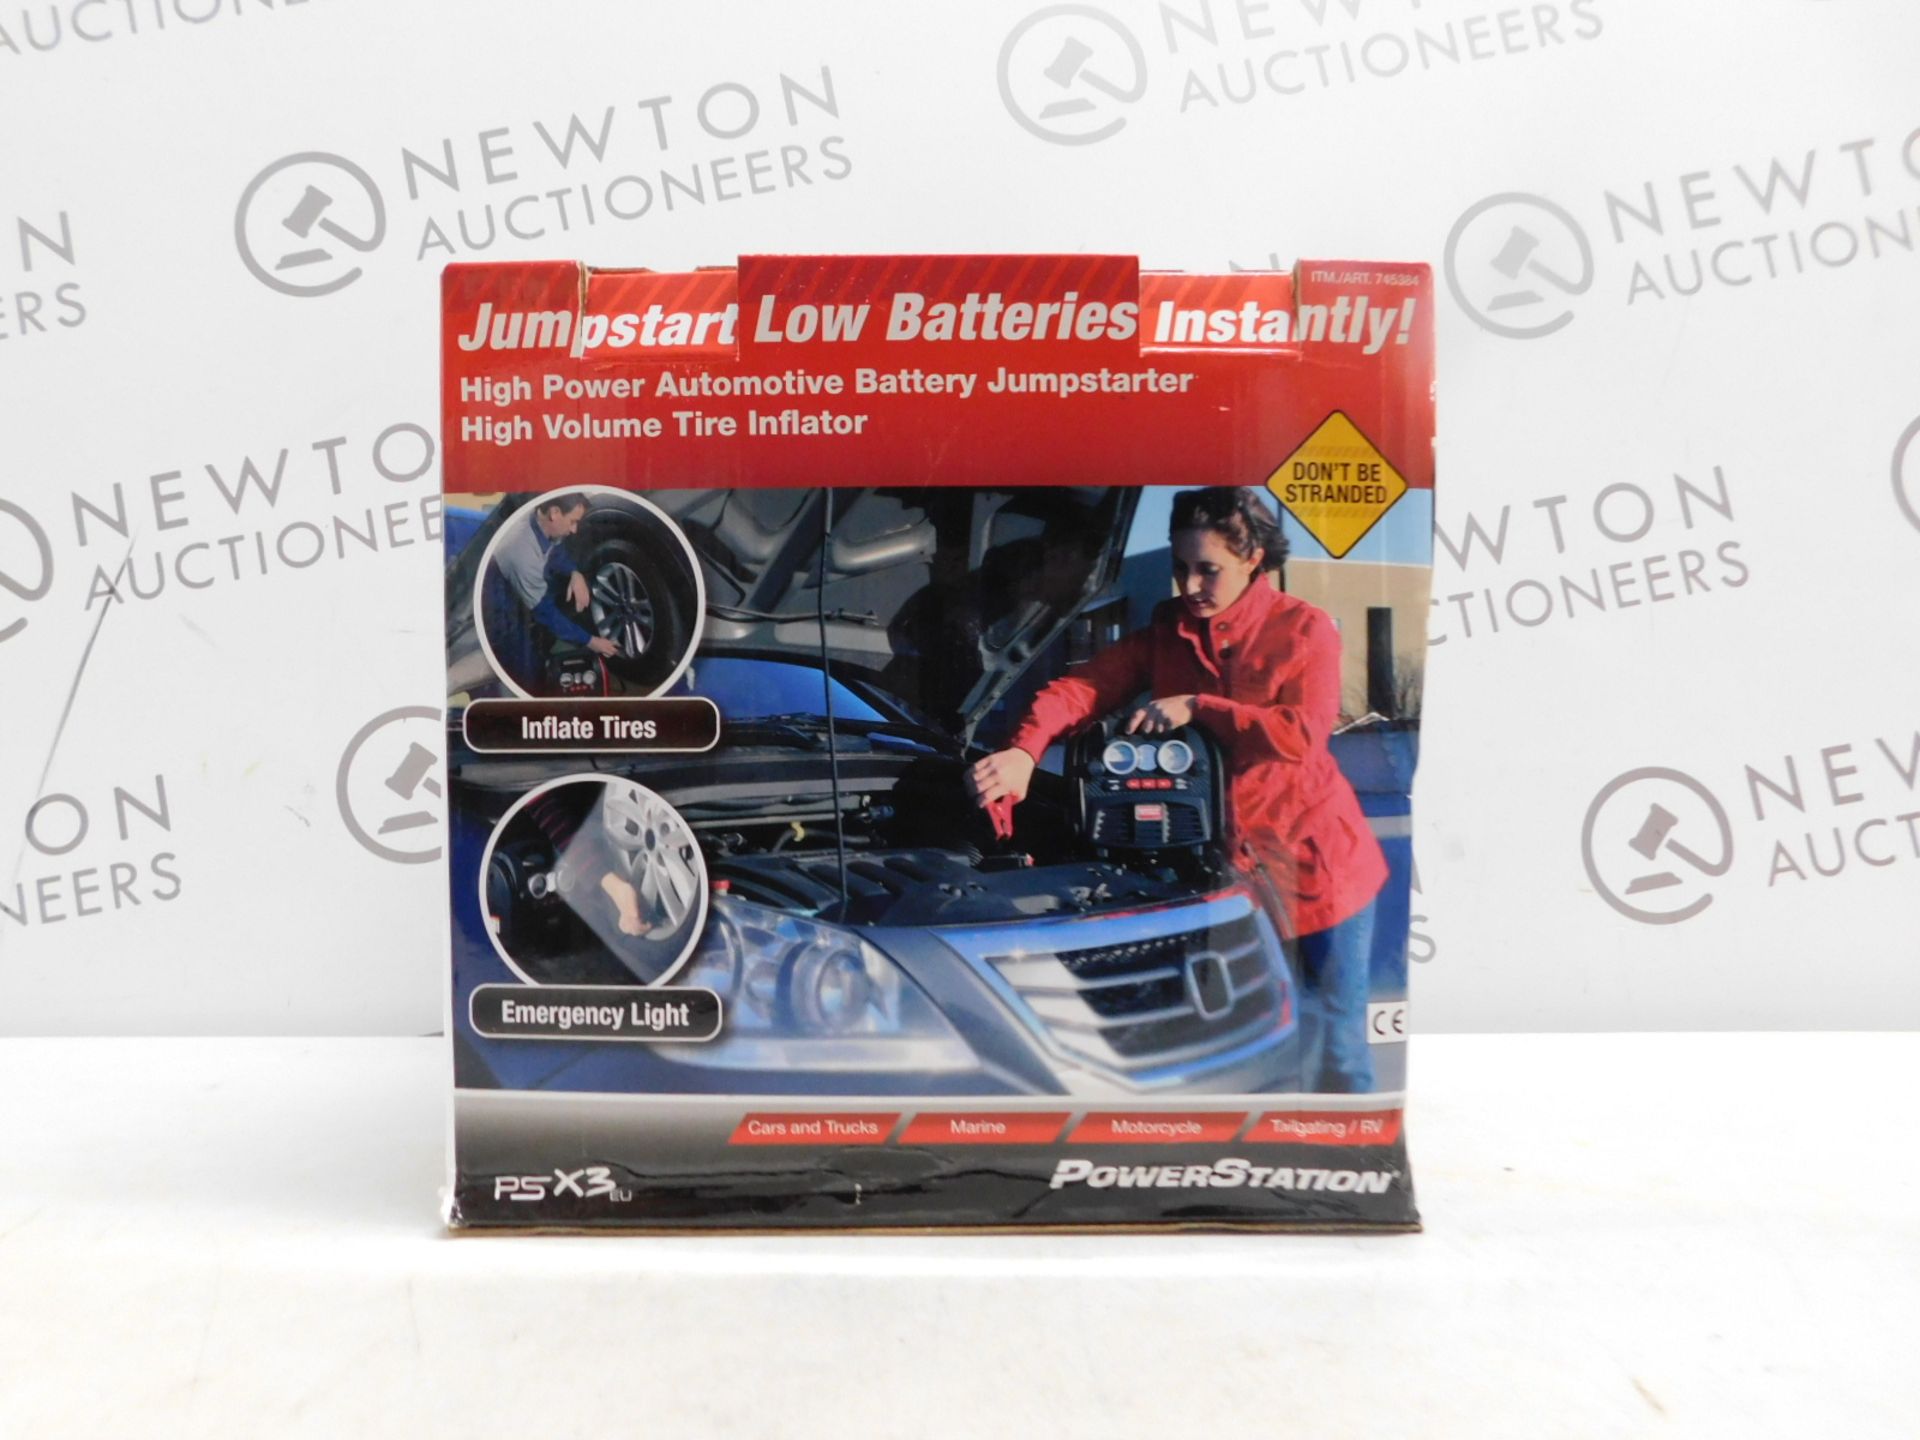 1 BOXED POWERSTATION PSX3 BATTERY JUMPSTARTER WITH BUILT IN LIGHT AND COMPRESSOR RRP Â£129.99